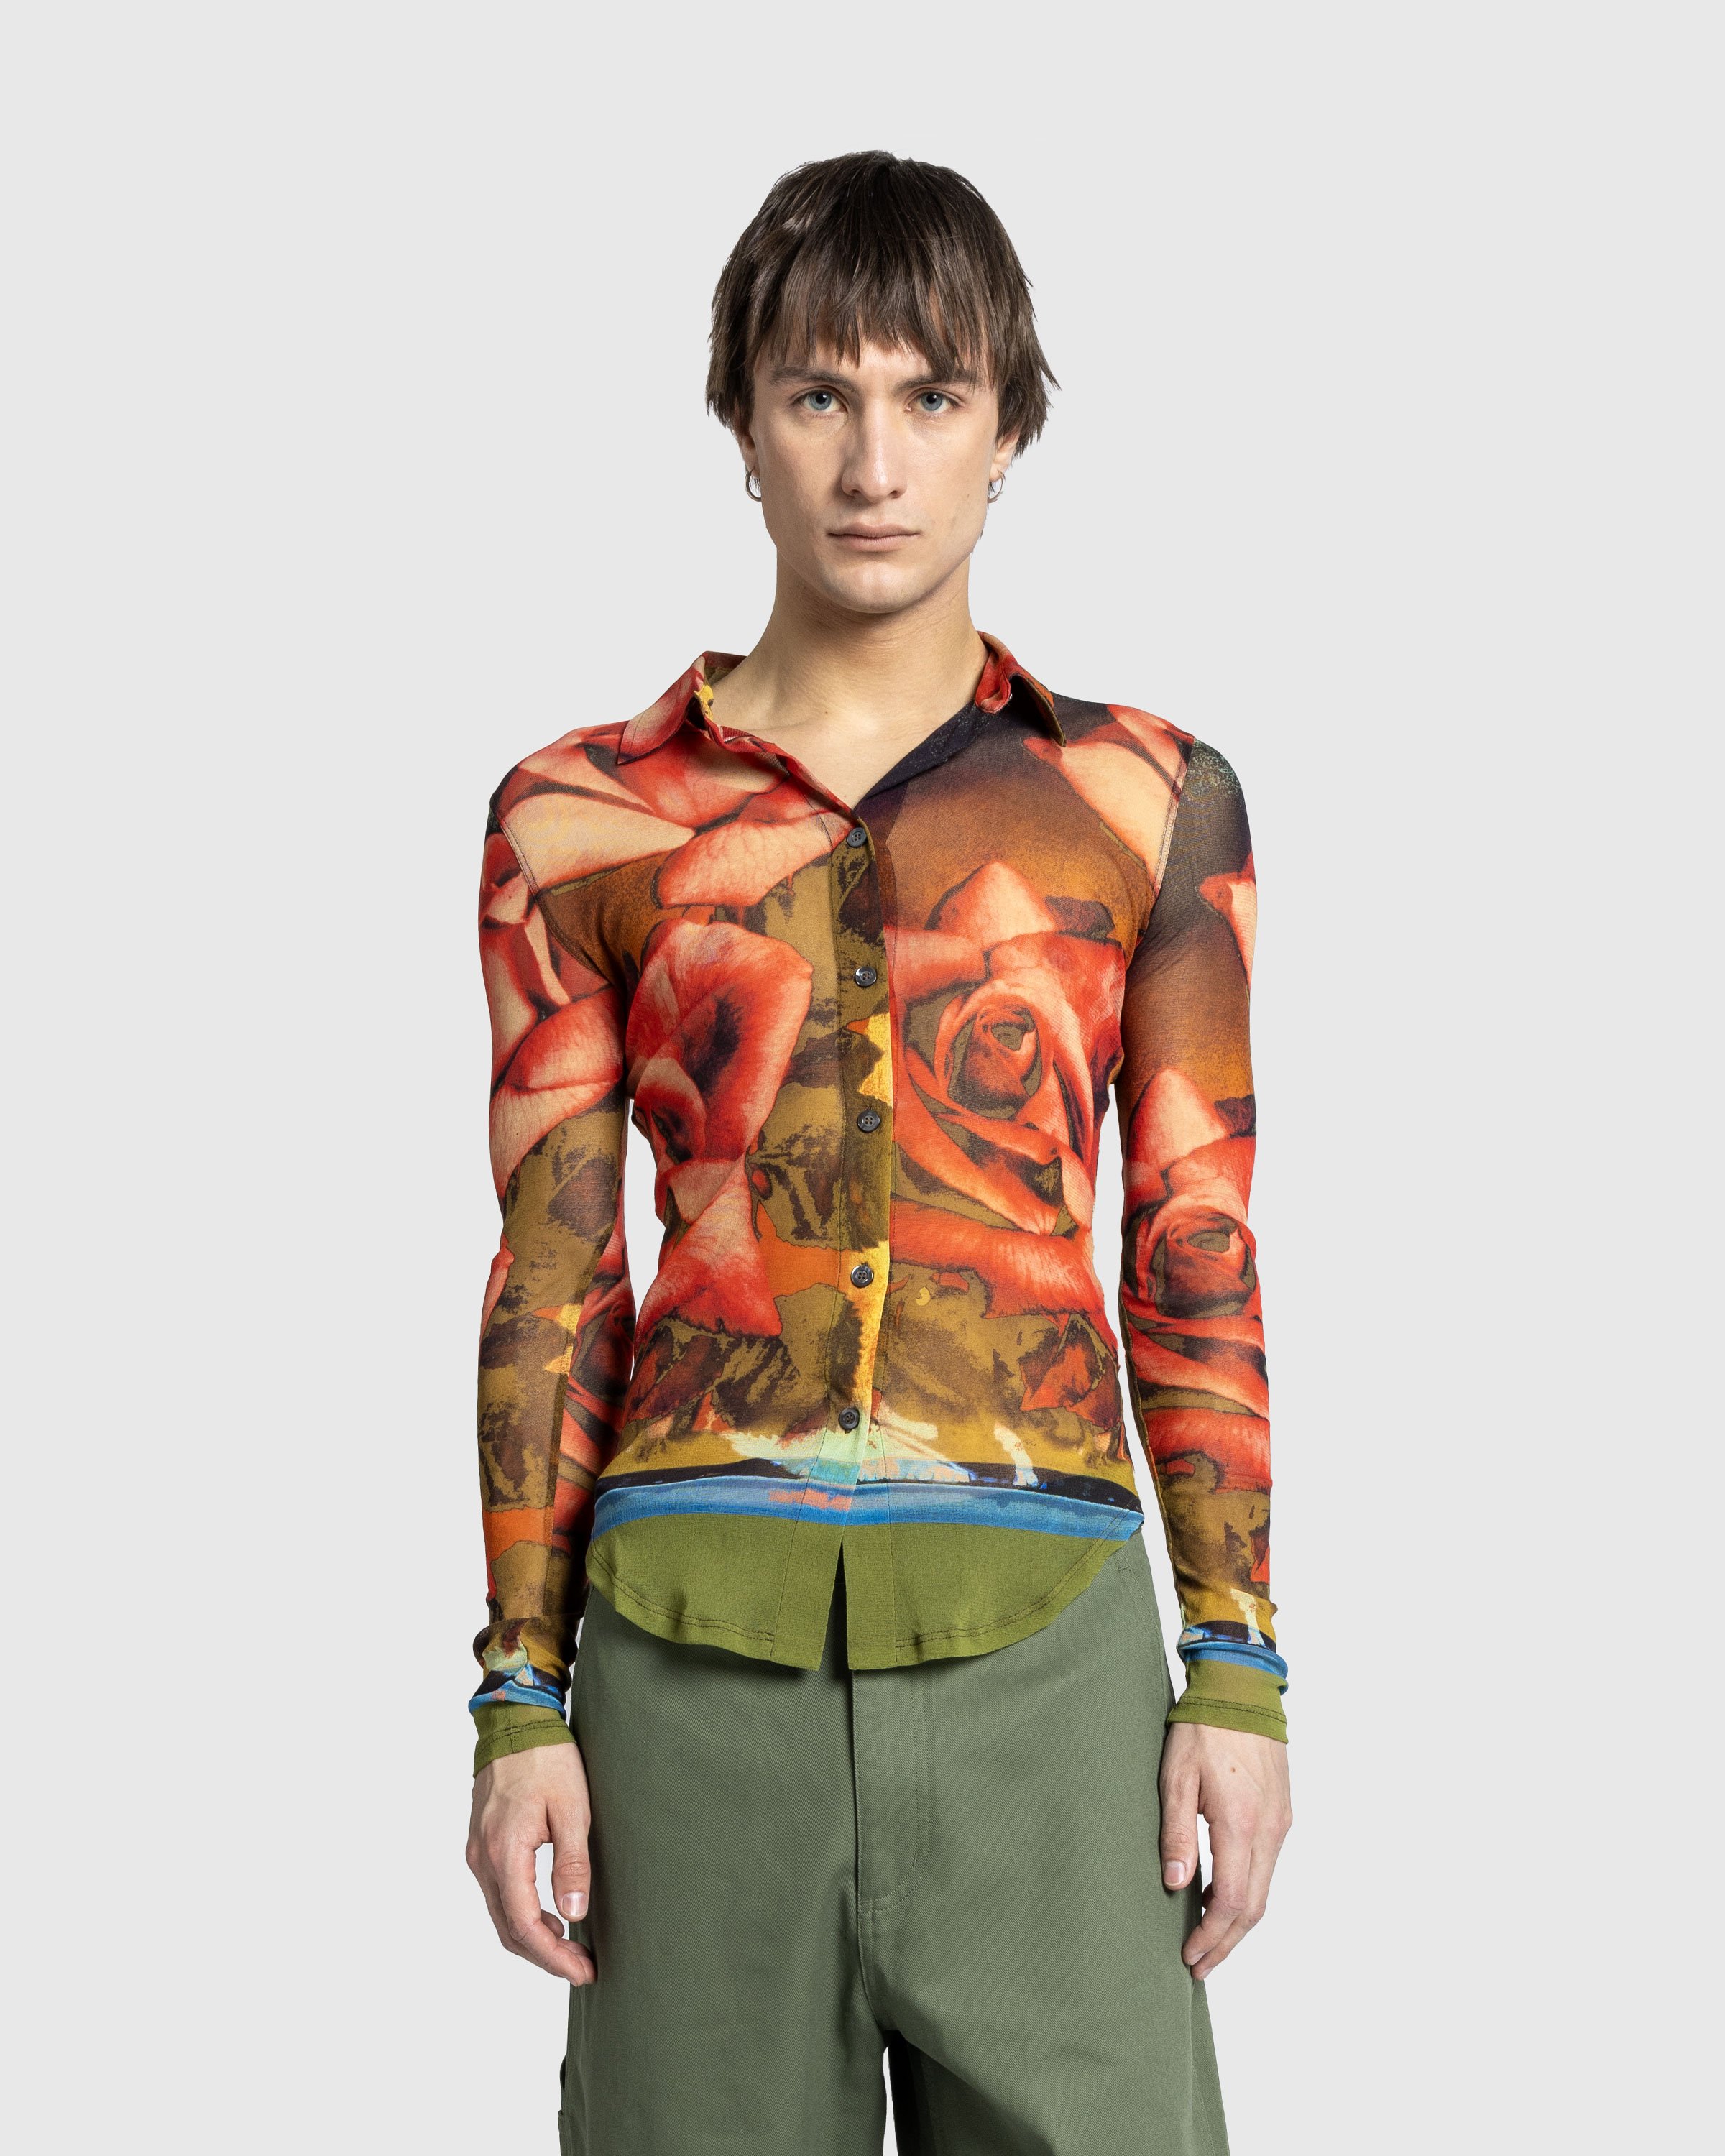 Jean Paul Gaultier - Mesh Long Sleeves Shirt Printed Roses Green/Red/Blue - Clothing - Multi - Image 2